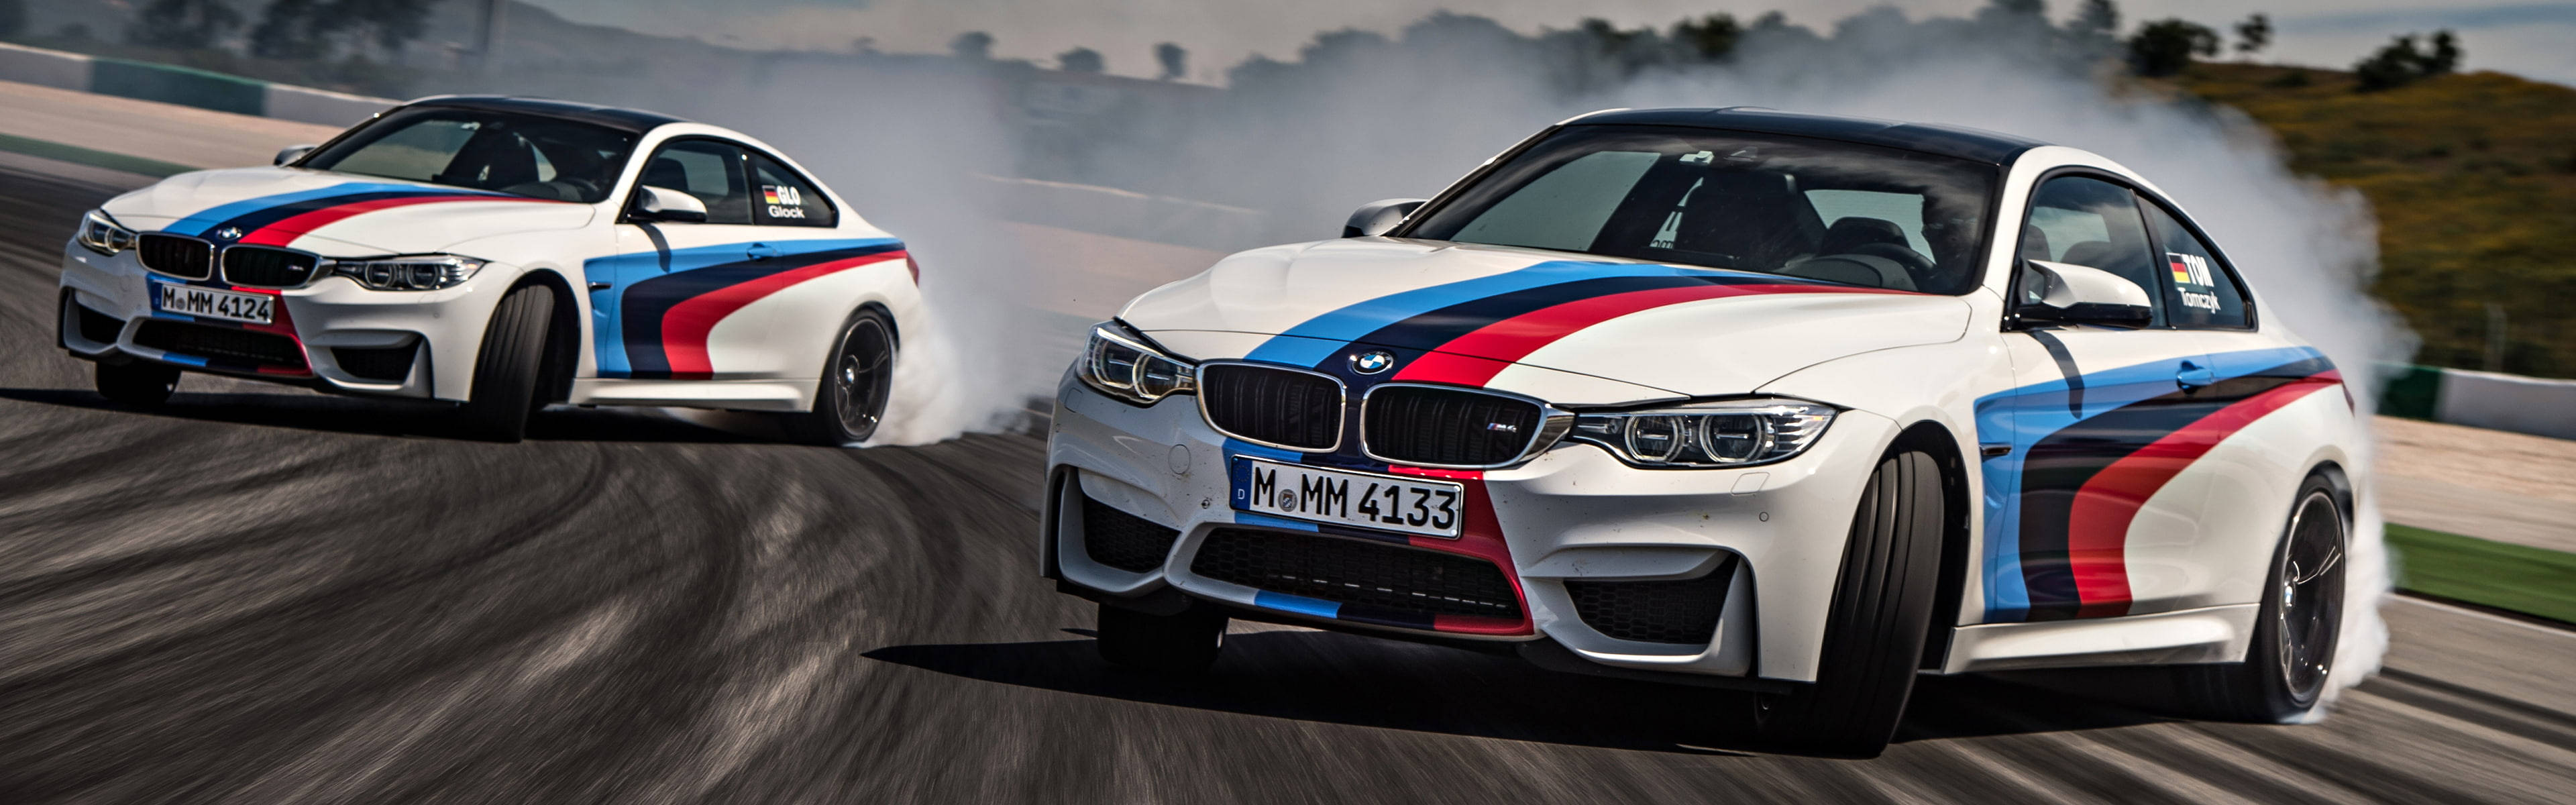 The Thrilling Ride Of A Bmw M4 Drift Car On The Track Background